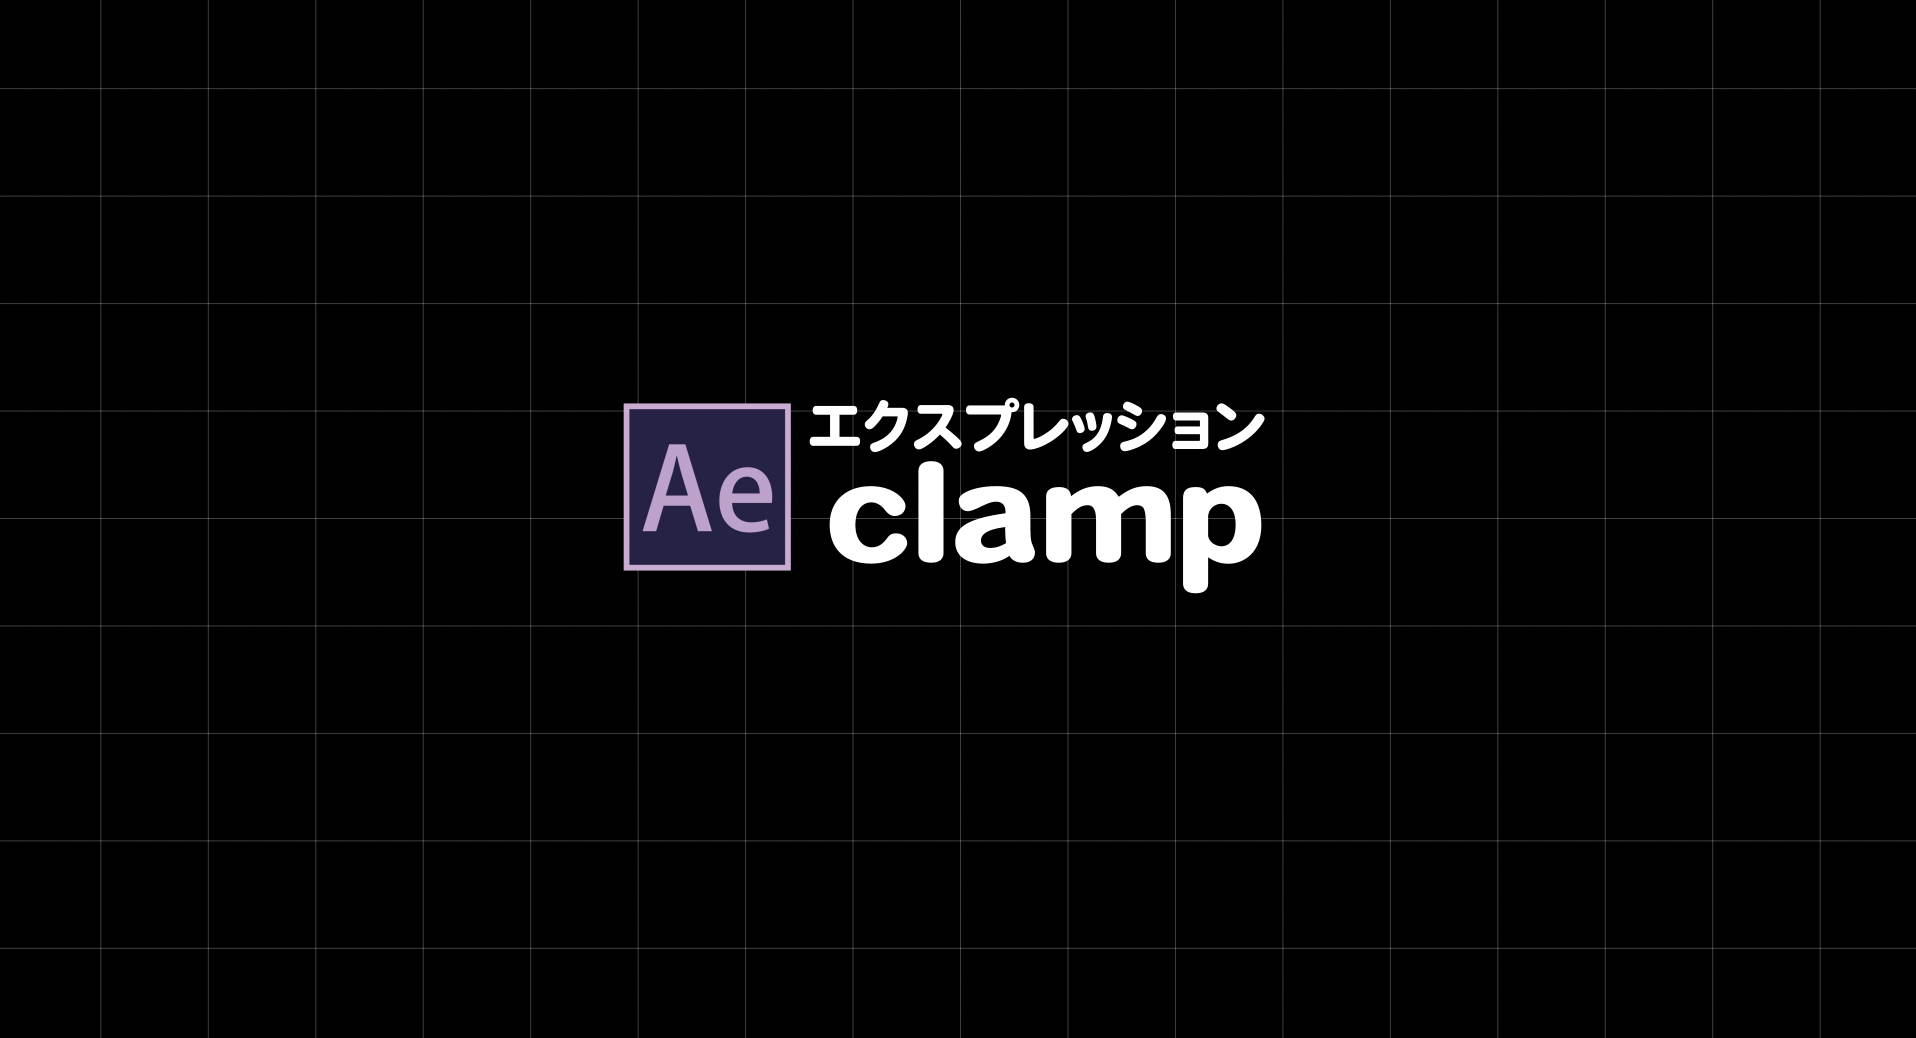 [After Effects]clampは範囲指定 _エクスプレッション